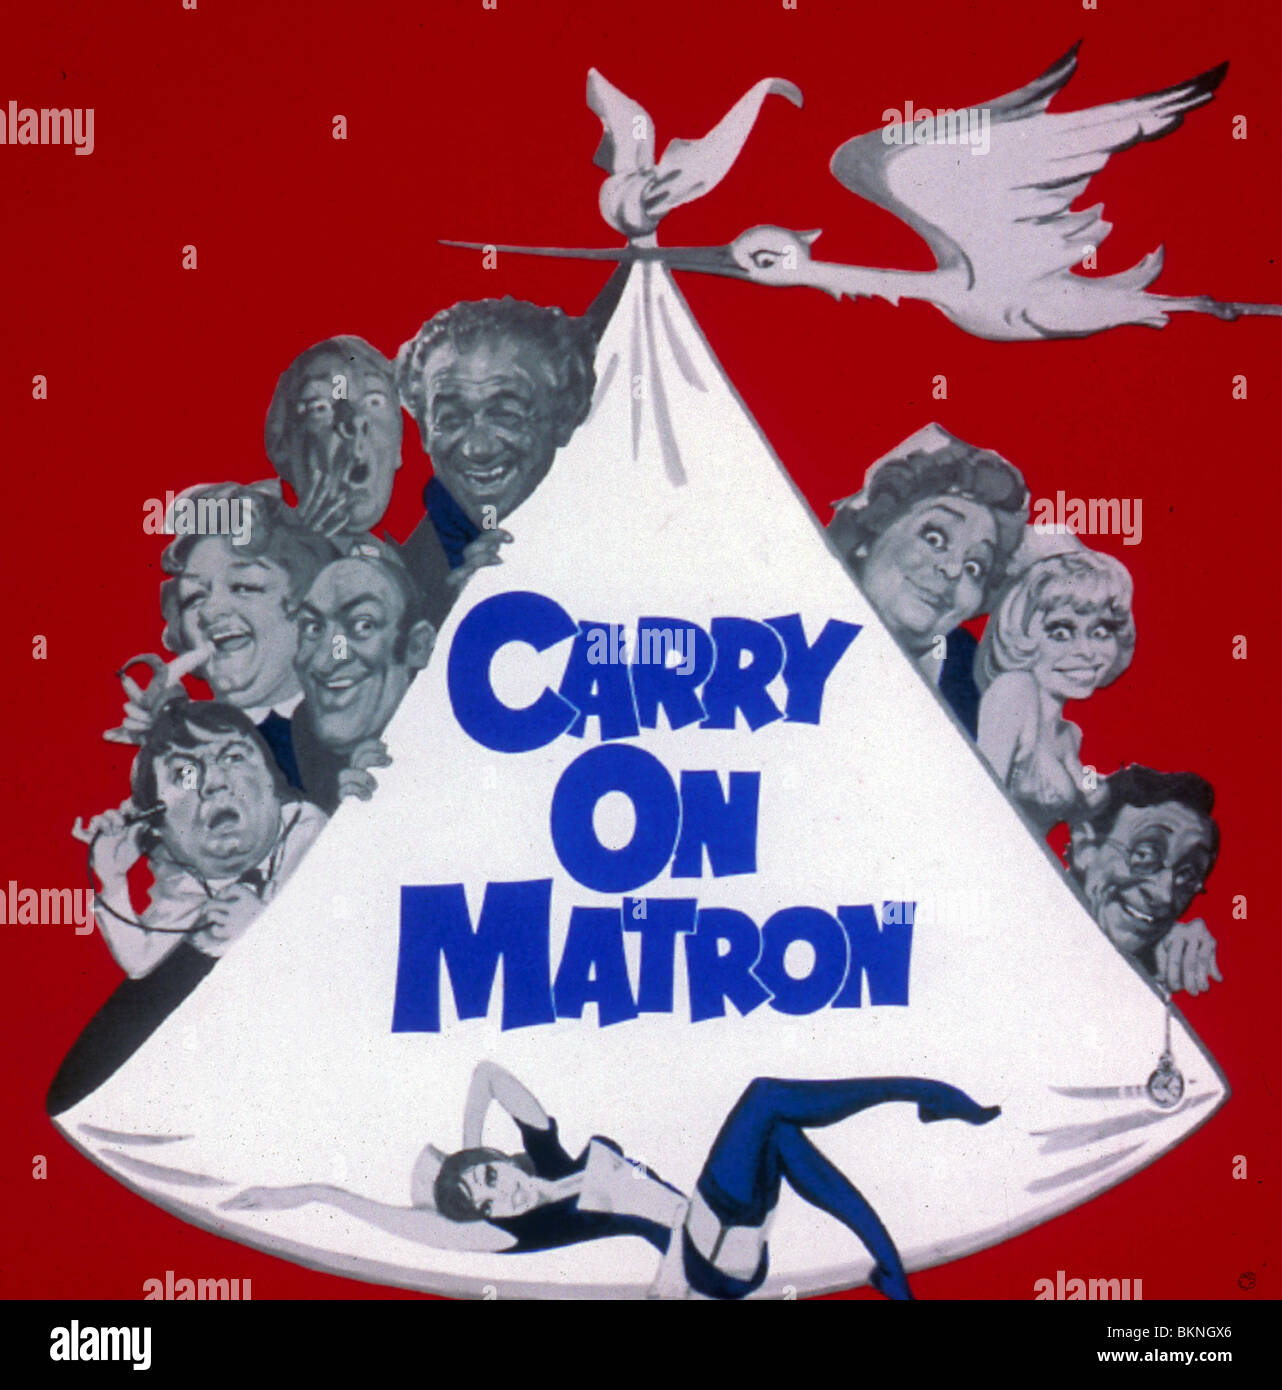 CARRY ON MATRON -1972 POSTER Stock Photo